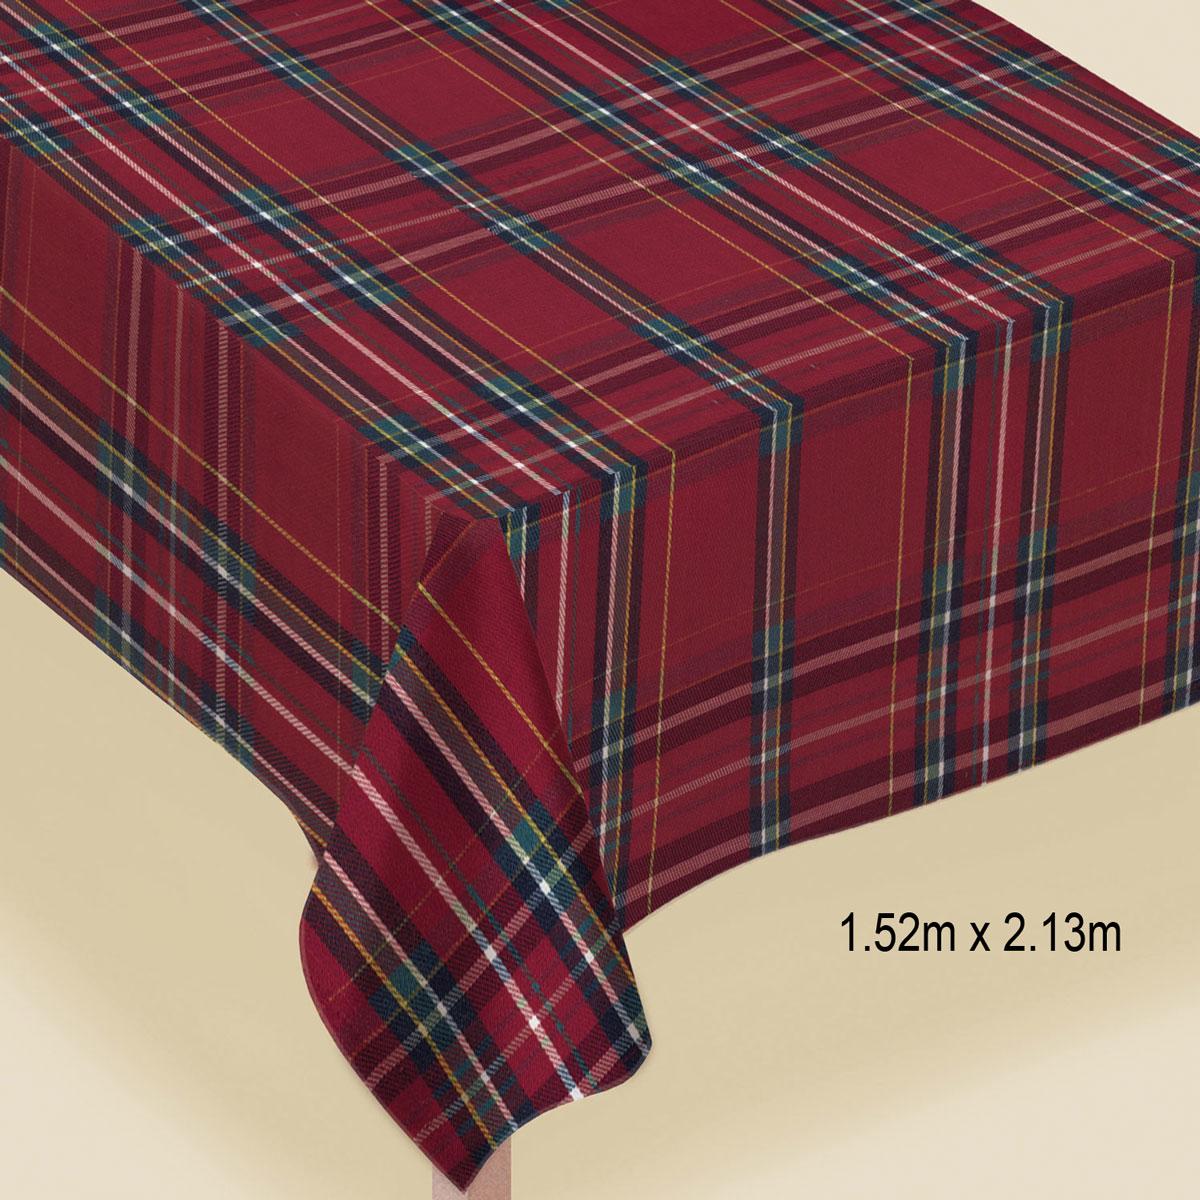 Printed Plaid Fabric Tartan Table Cover - 2.13m x 1.52m by Amscan 570094 available here at Karnival Costumes online Christmas party shop